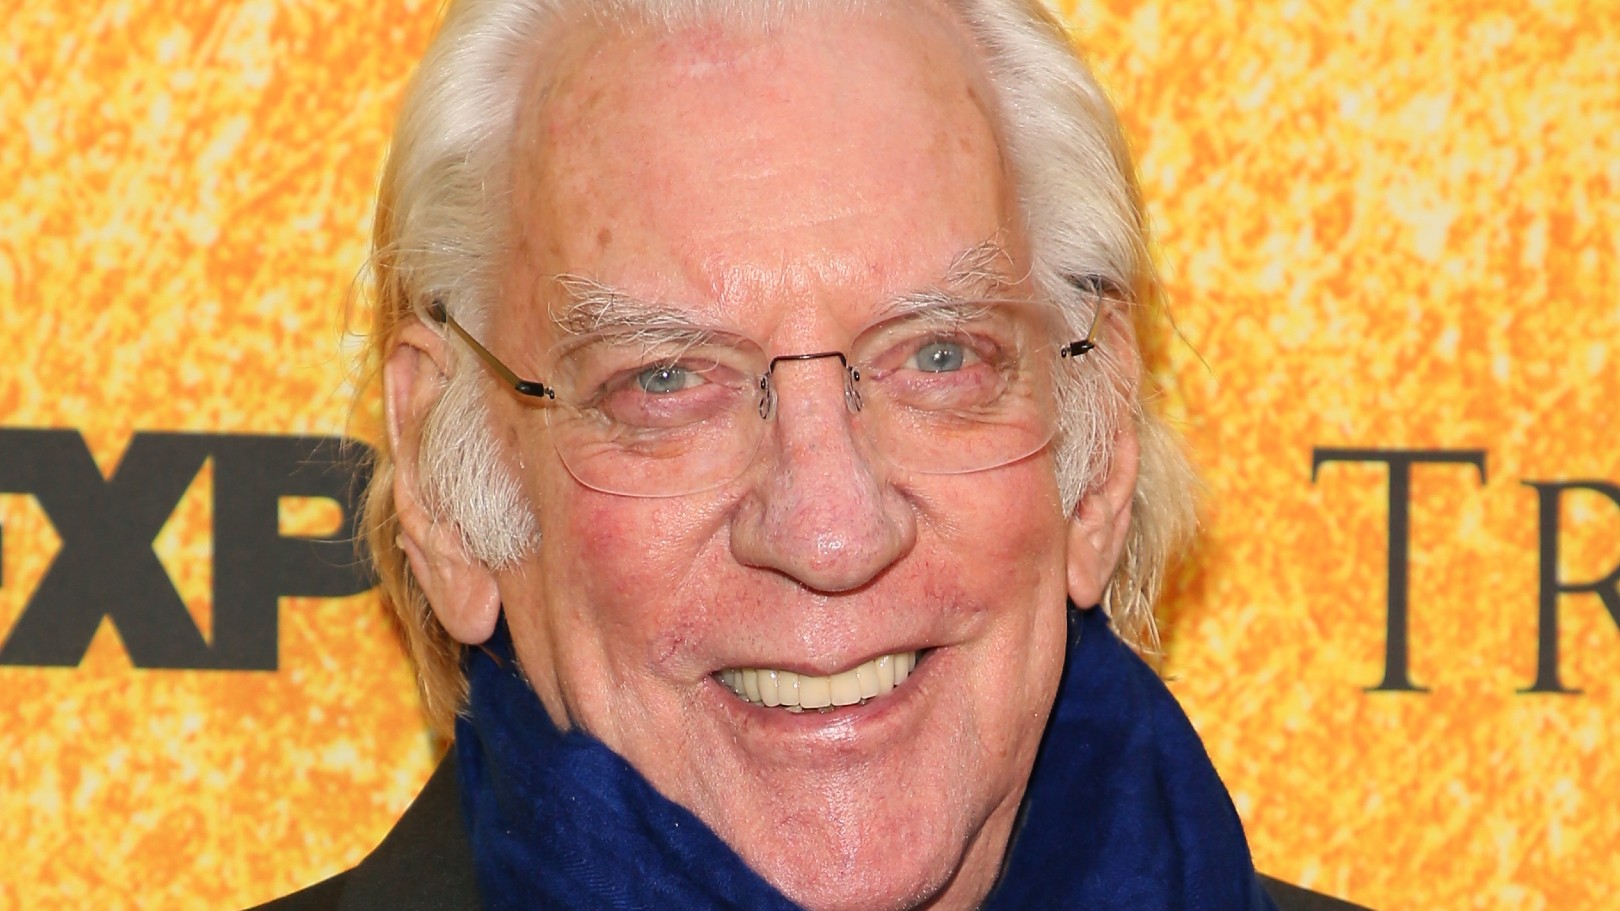 The Hunger Games’ Actor Donald Sutherland Passes Away at 88